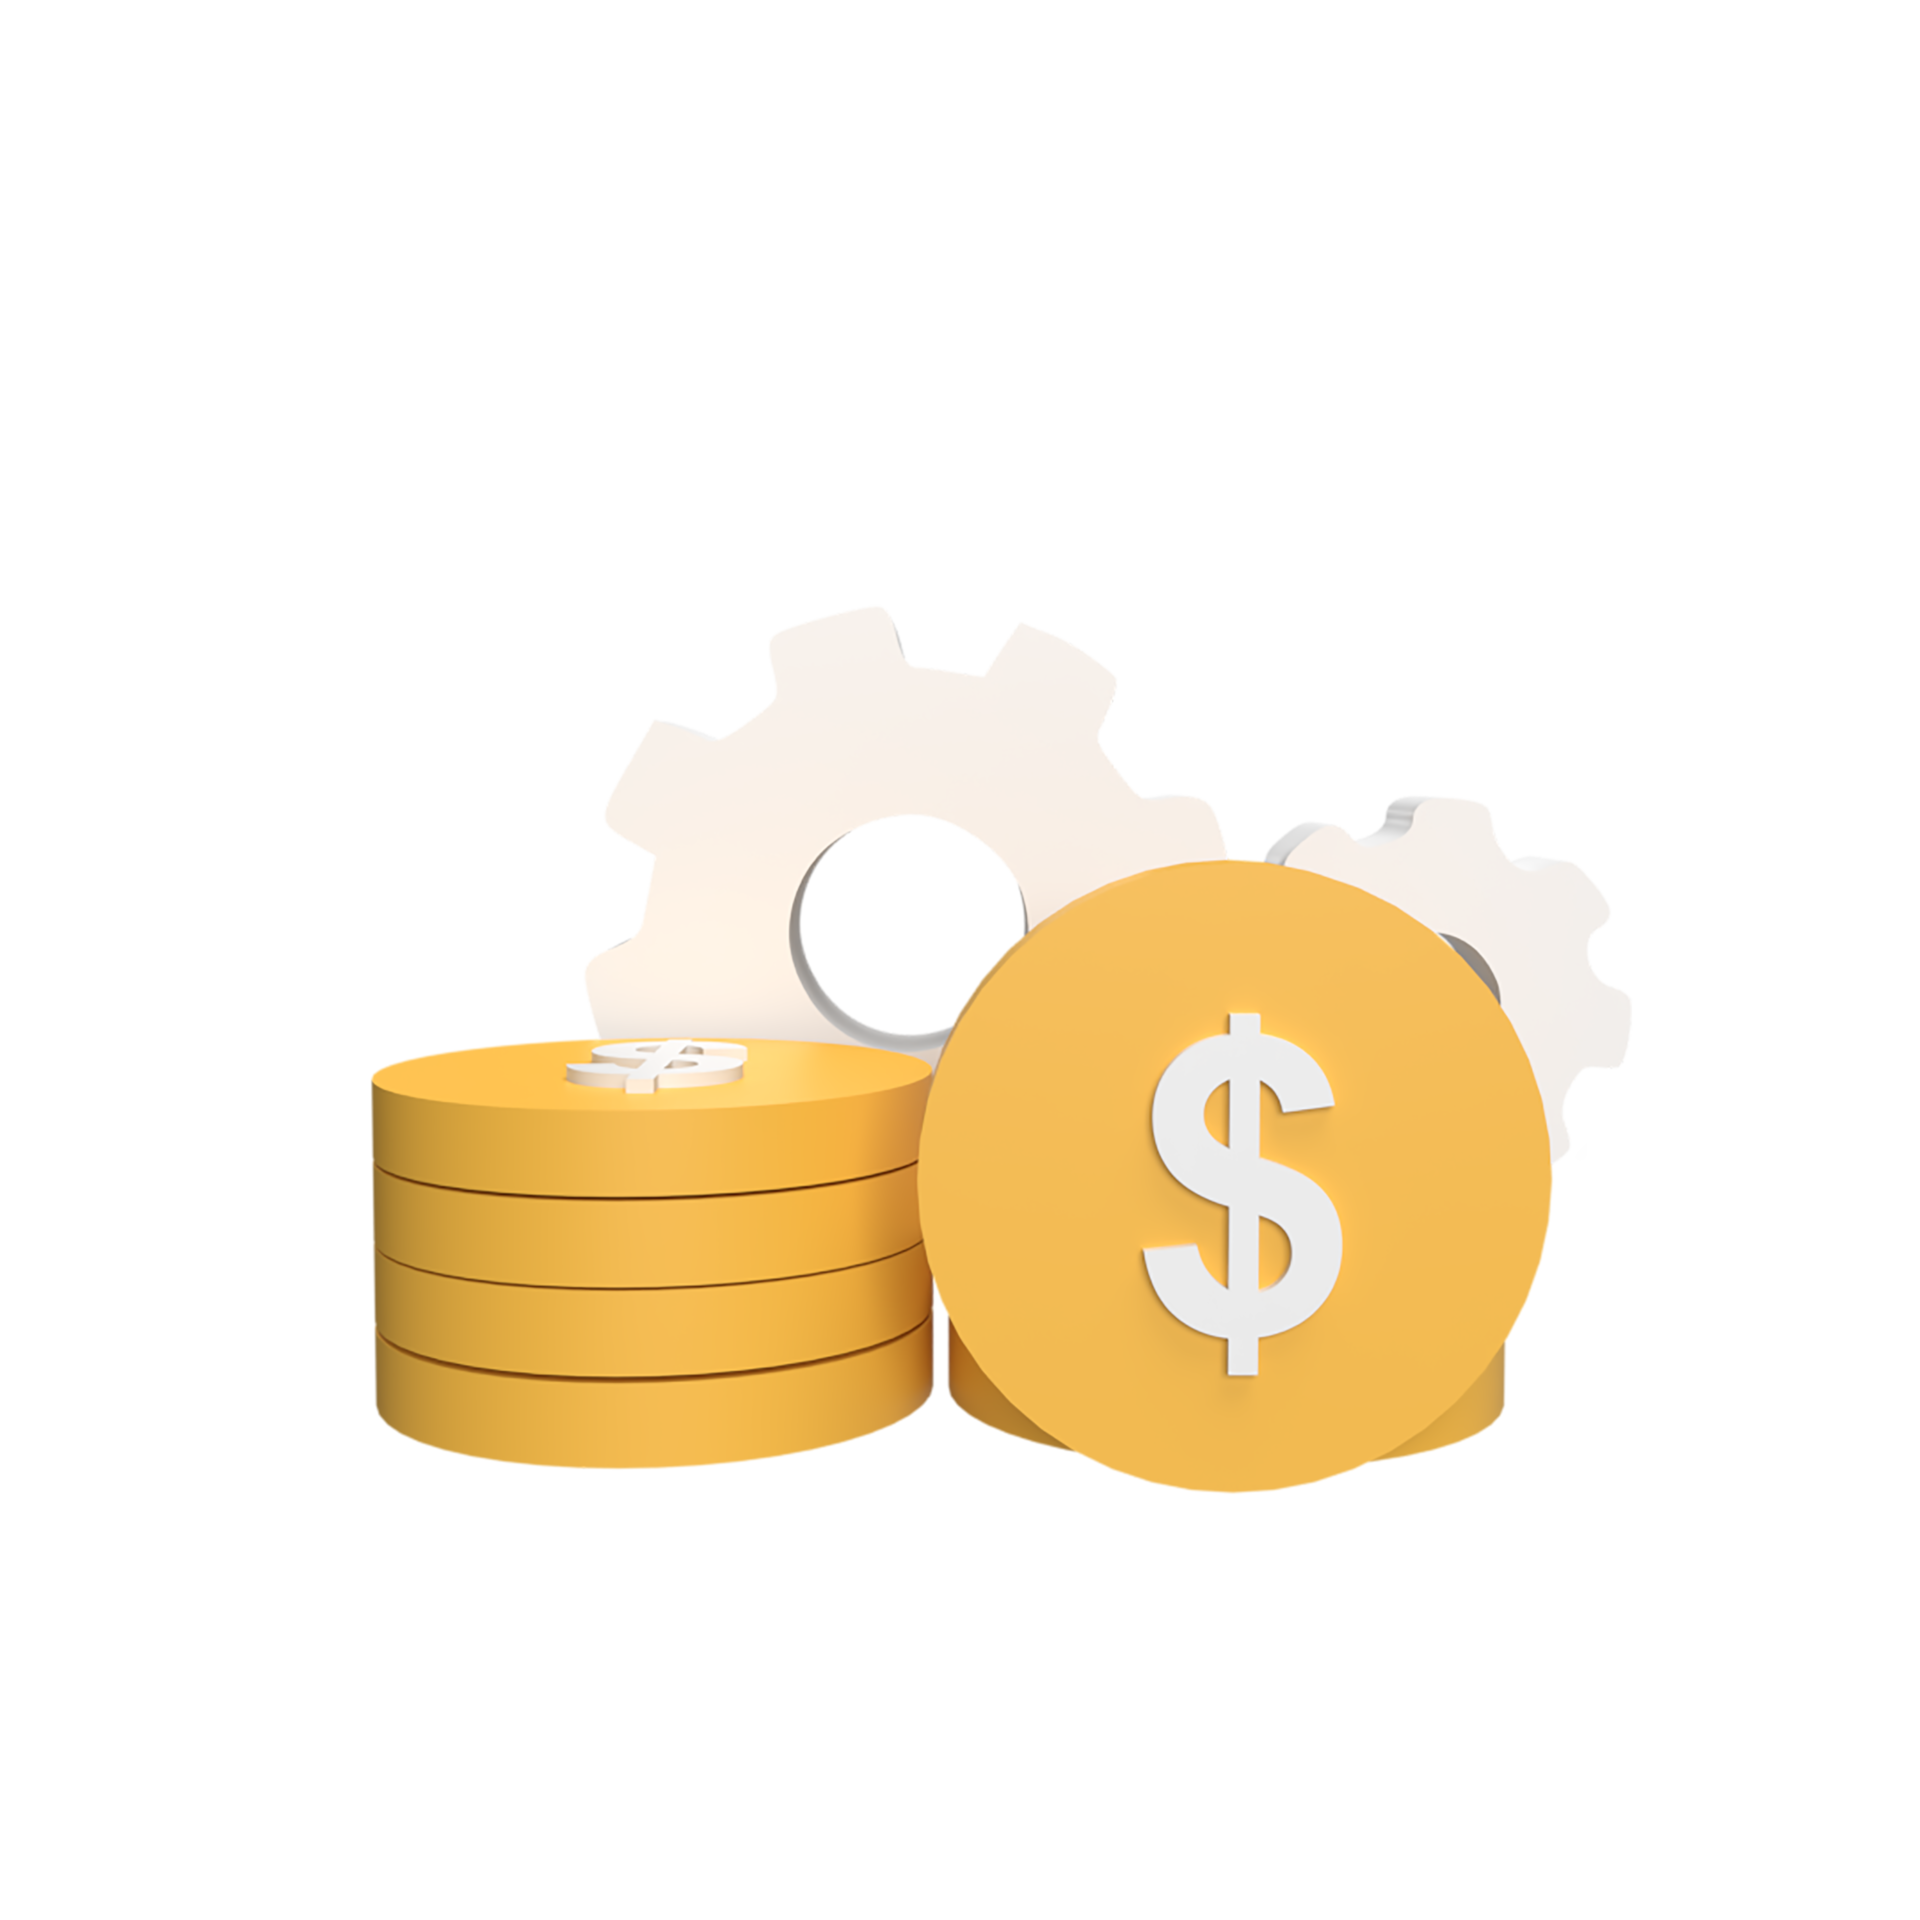 Free Money management 3d icon model cartoon style concept. render  illustration 8480173 PNG with Transparent Background